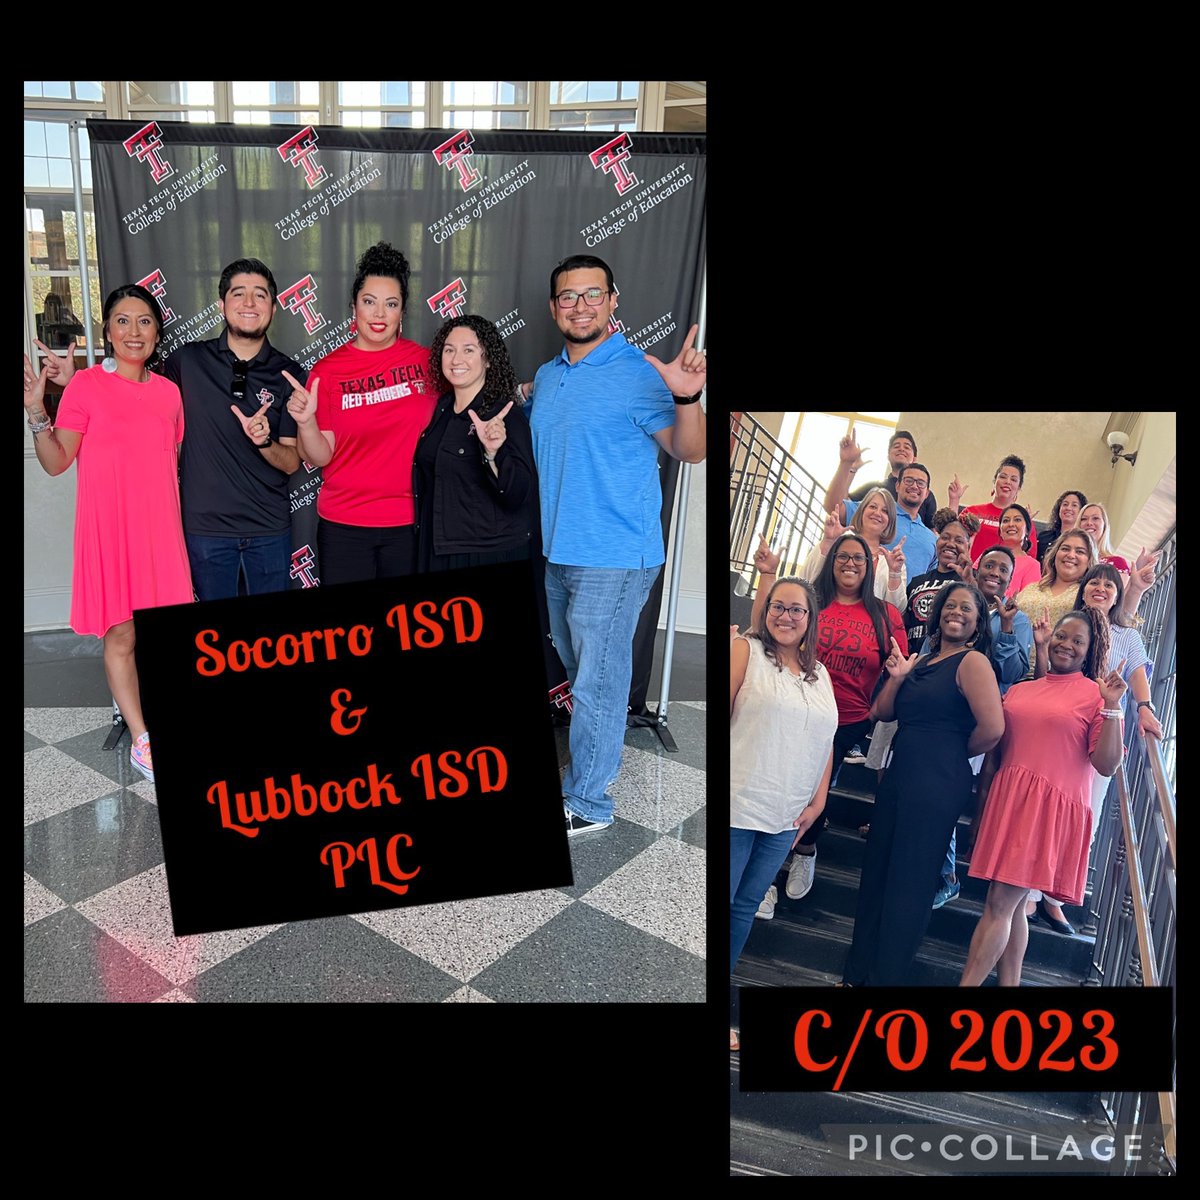 Thank you Texas Tech for hosting the 10th cohort and allowing us to network with so many districts. We look forward to this new journey, class of 2023. #TeamSISD #TTU #PrincipalFellows #Cohort3